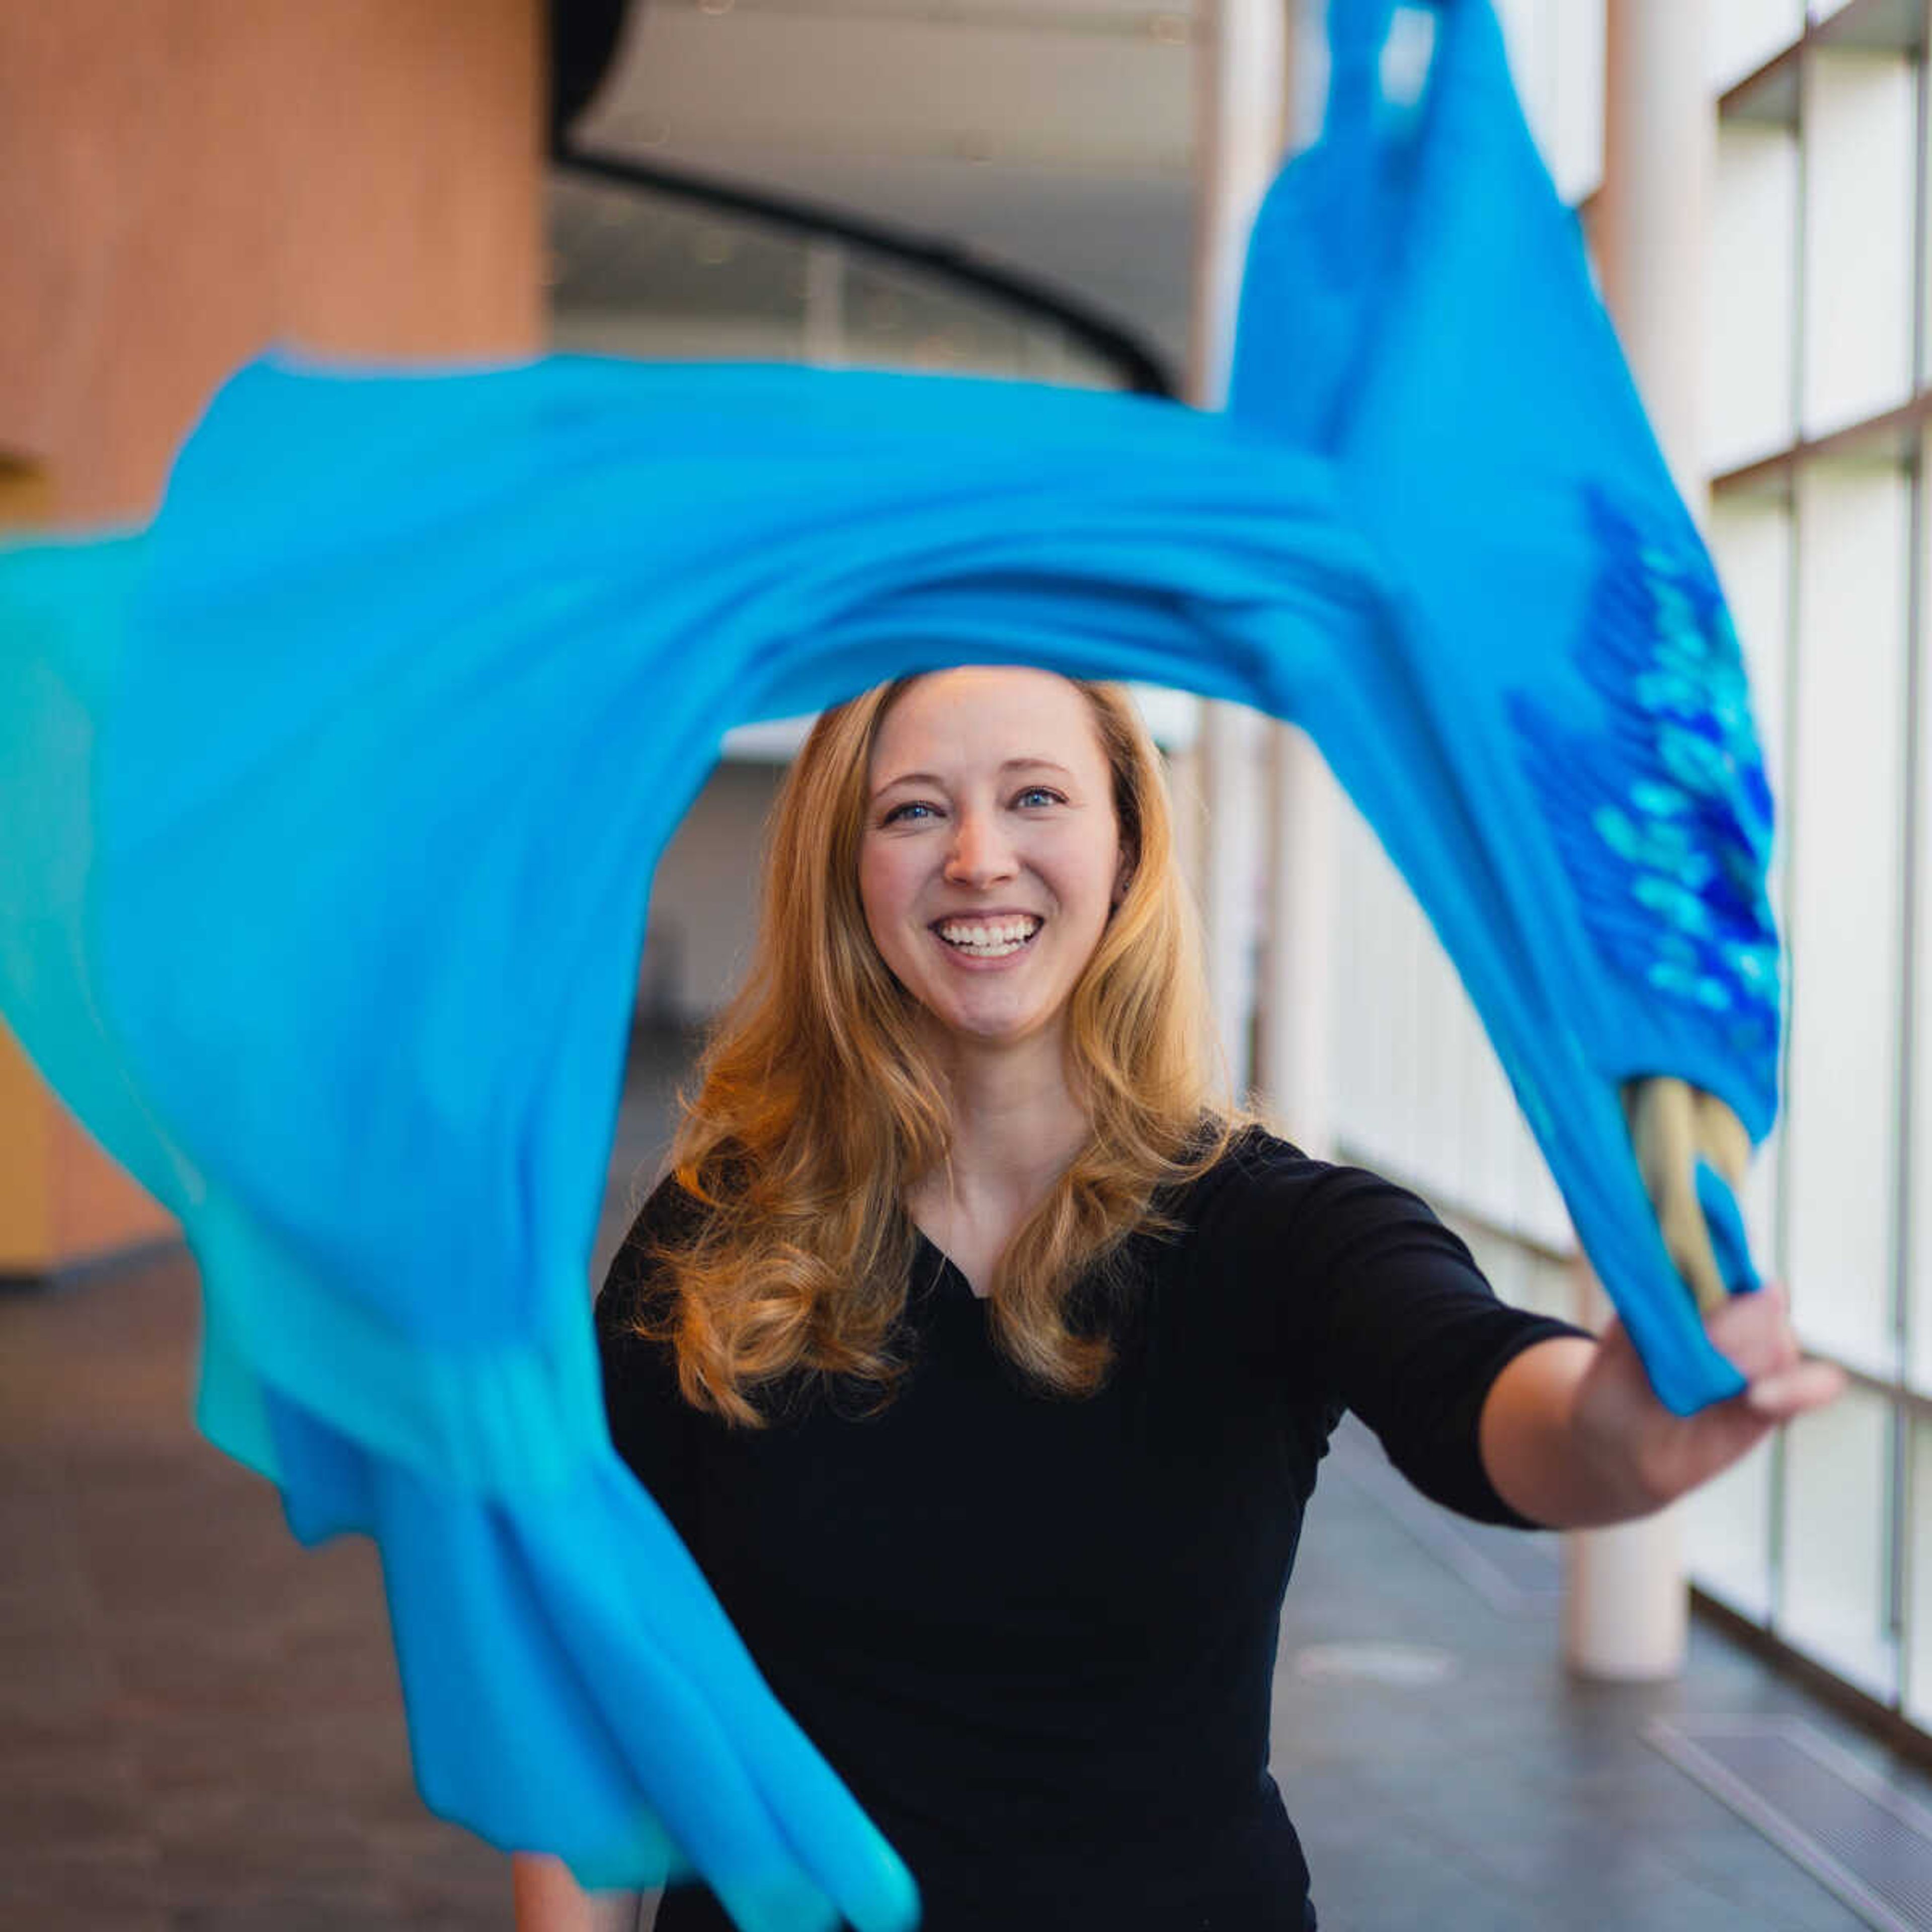 Alyssa Alger, 31, has built Alger Designs from the ground up since she was getting her master’s at the University of Arizona. Now Alger balances being an instructor of dance at Southeast with running her own small business.